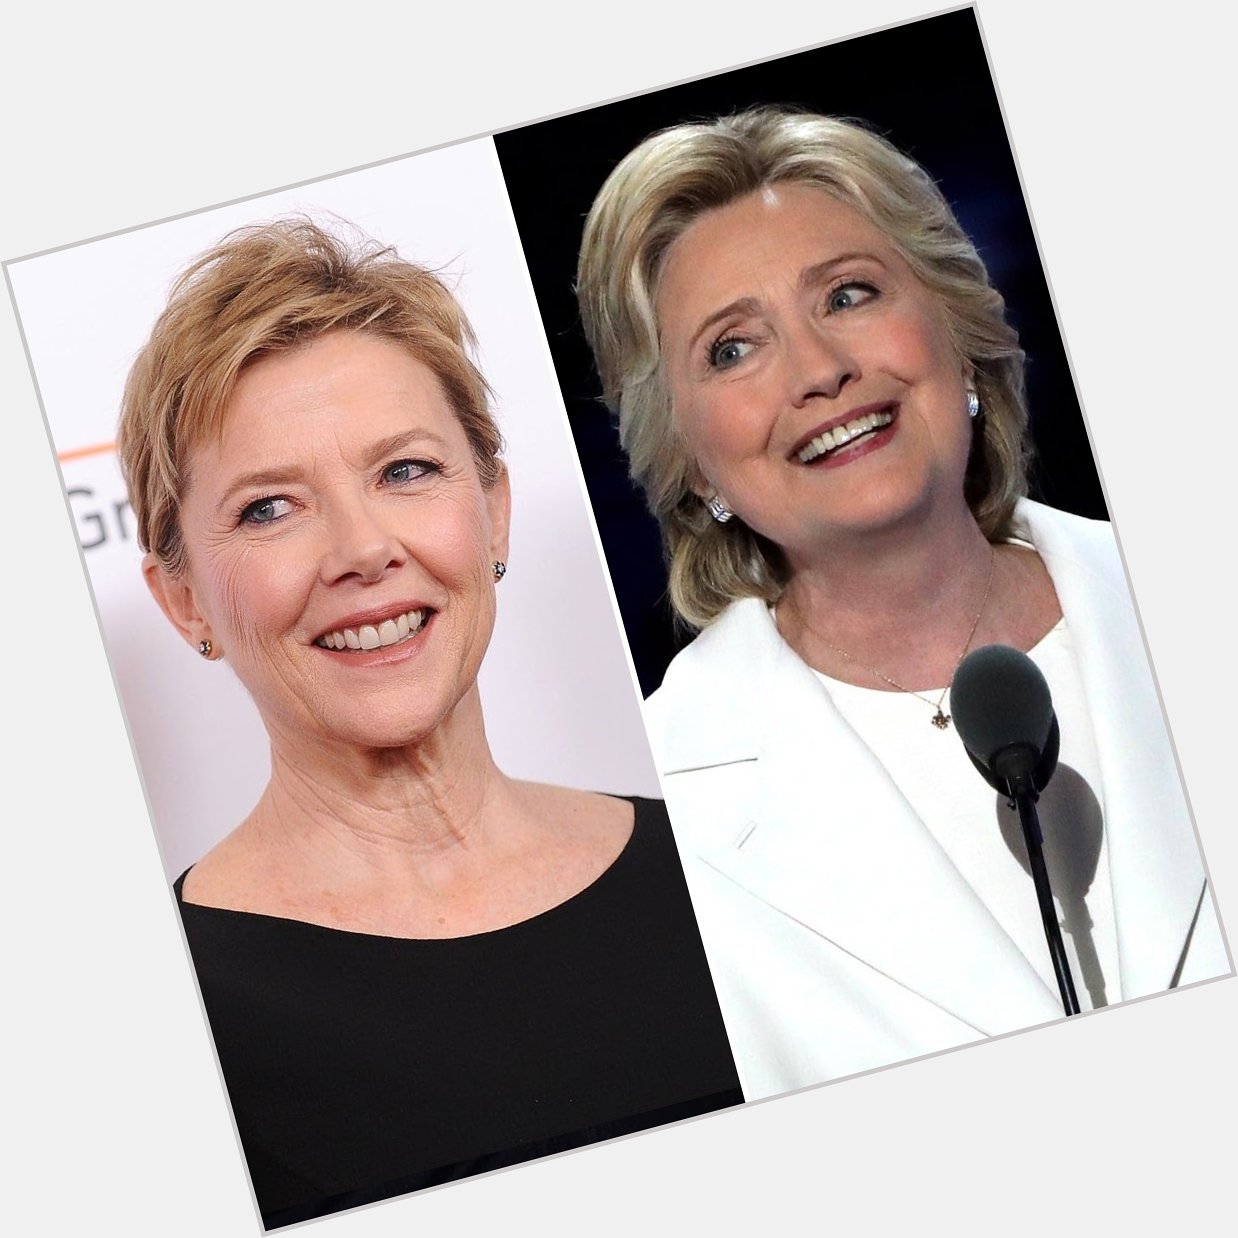 Happy birthday to Annette Bening, who would make a wonderful casting choice for a Hillary biopic. 